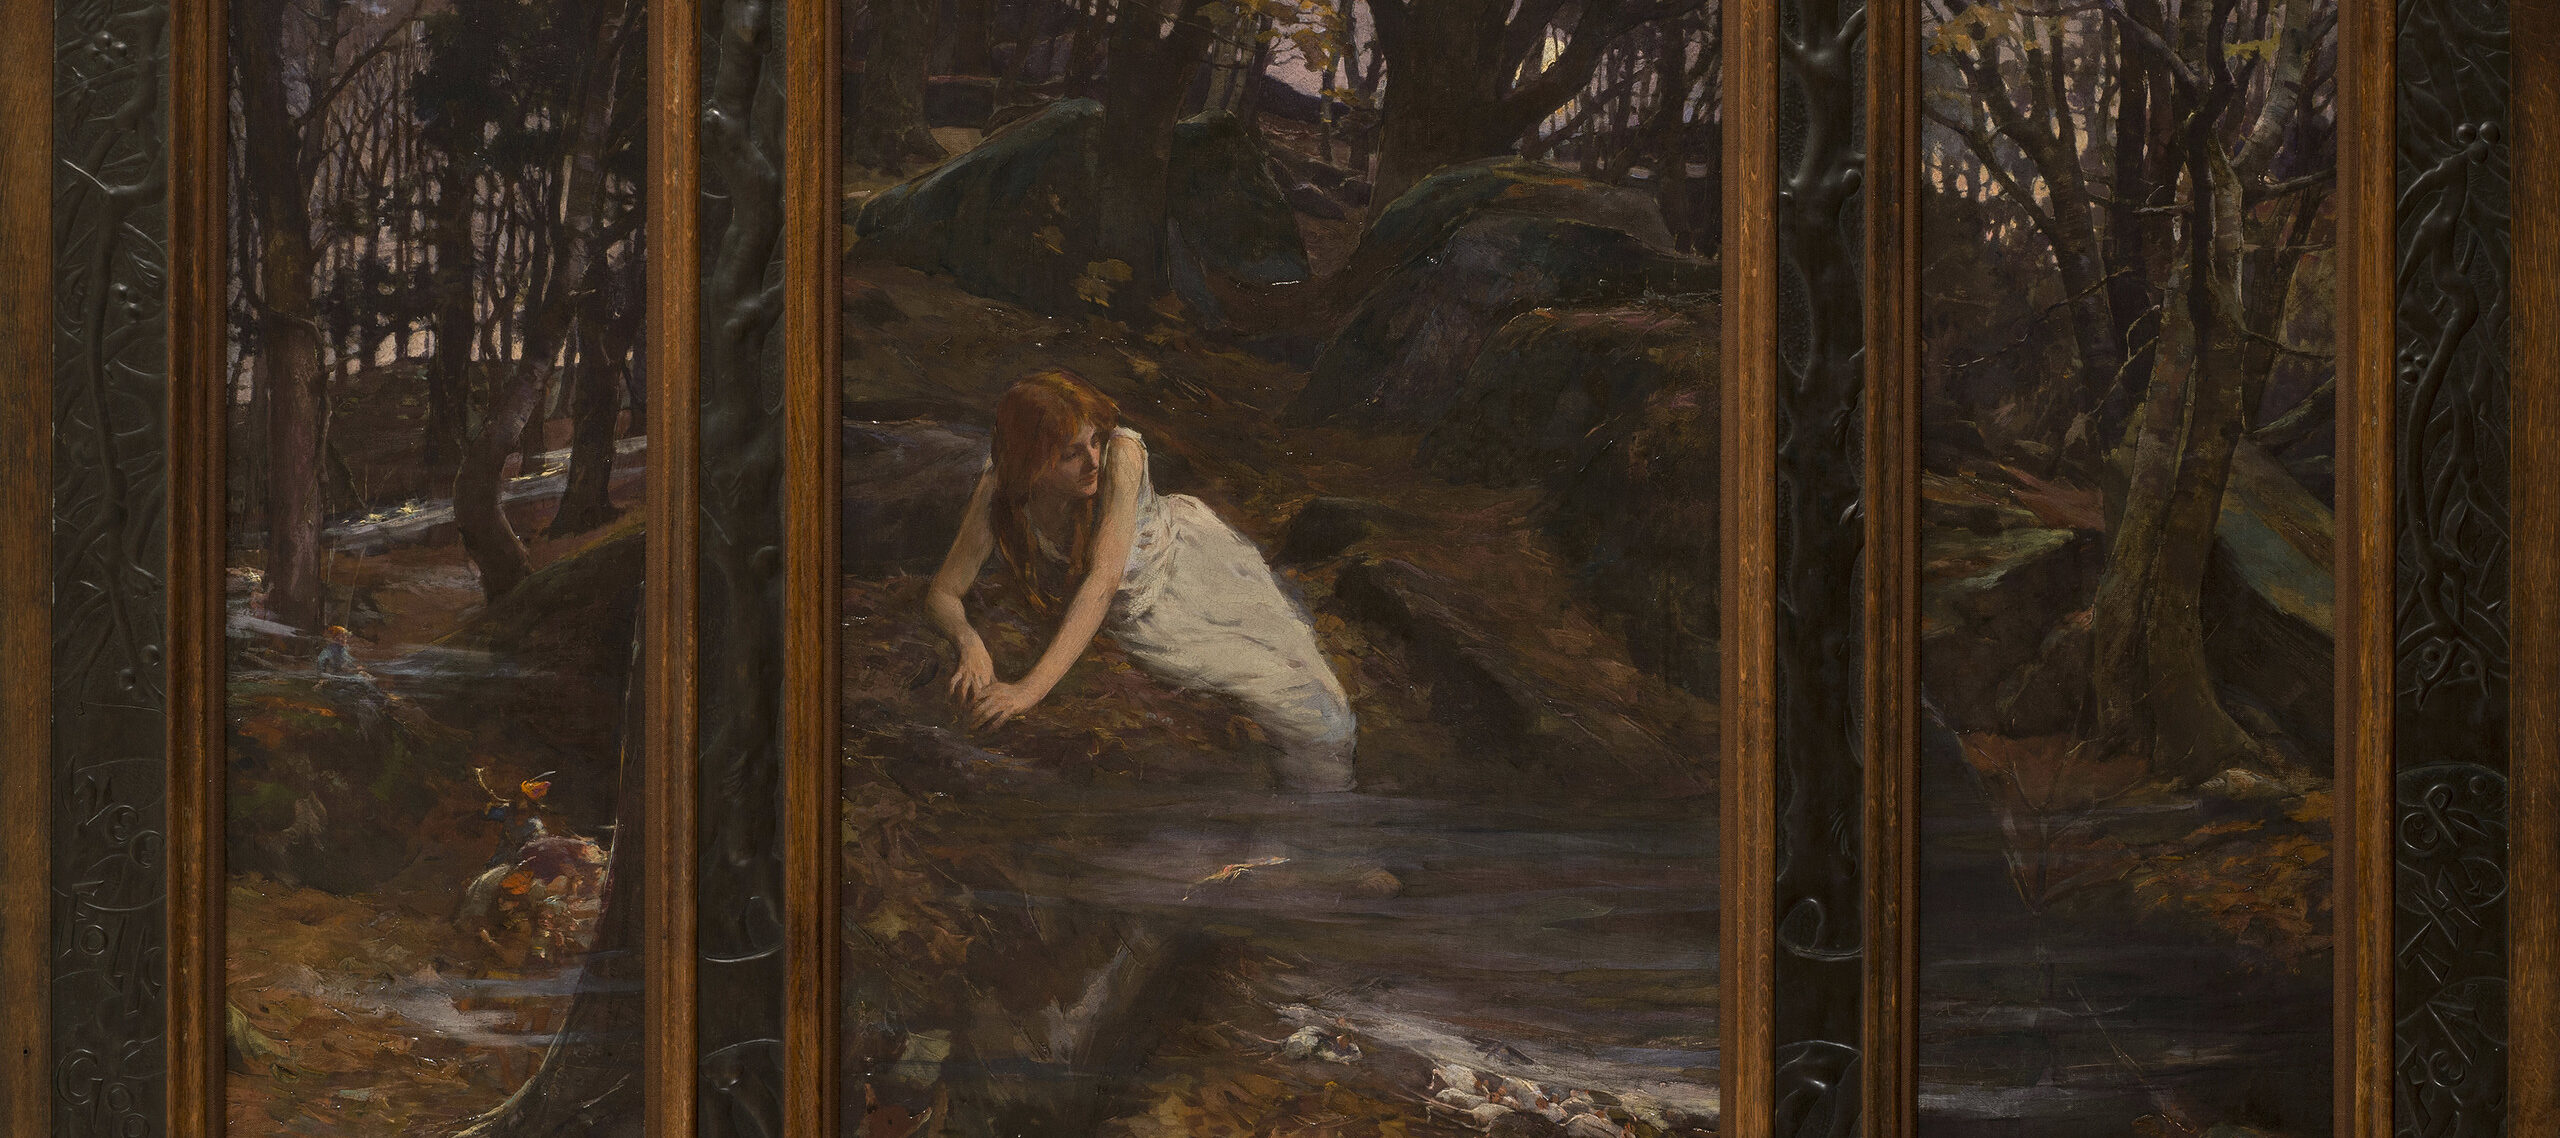 An auburn-haired, light-skinned young woman occupies the central panel of a triptych. Barefoot and clad in a sleeveless white dress, she reclines on a bed of autumn leaves in a rocky, moonlit landscape. The mist at her feet obscures mice. Fairy folk frolic in the left panel.